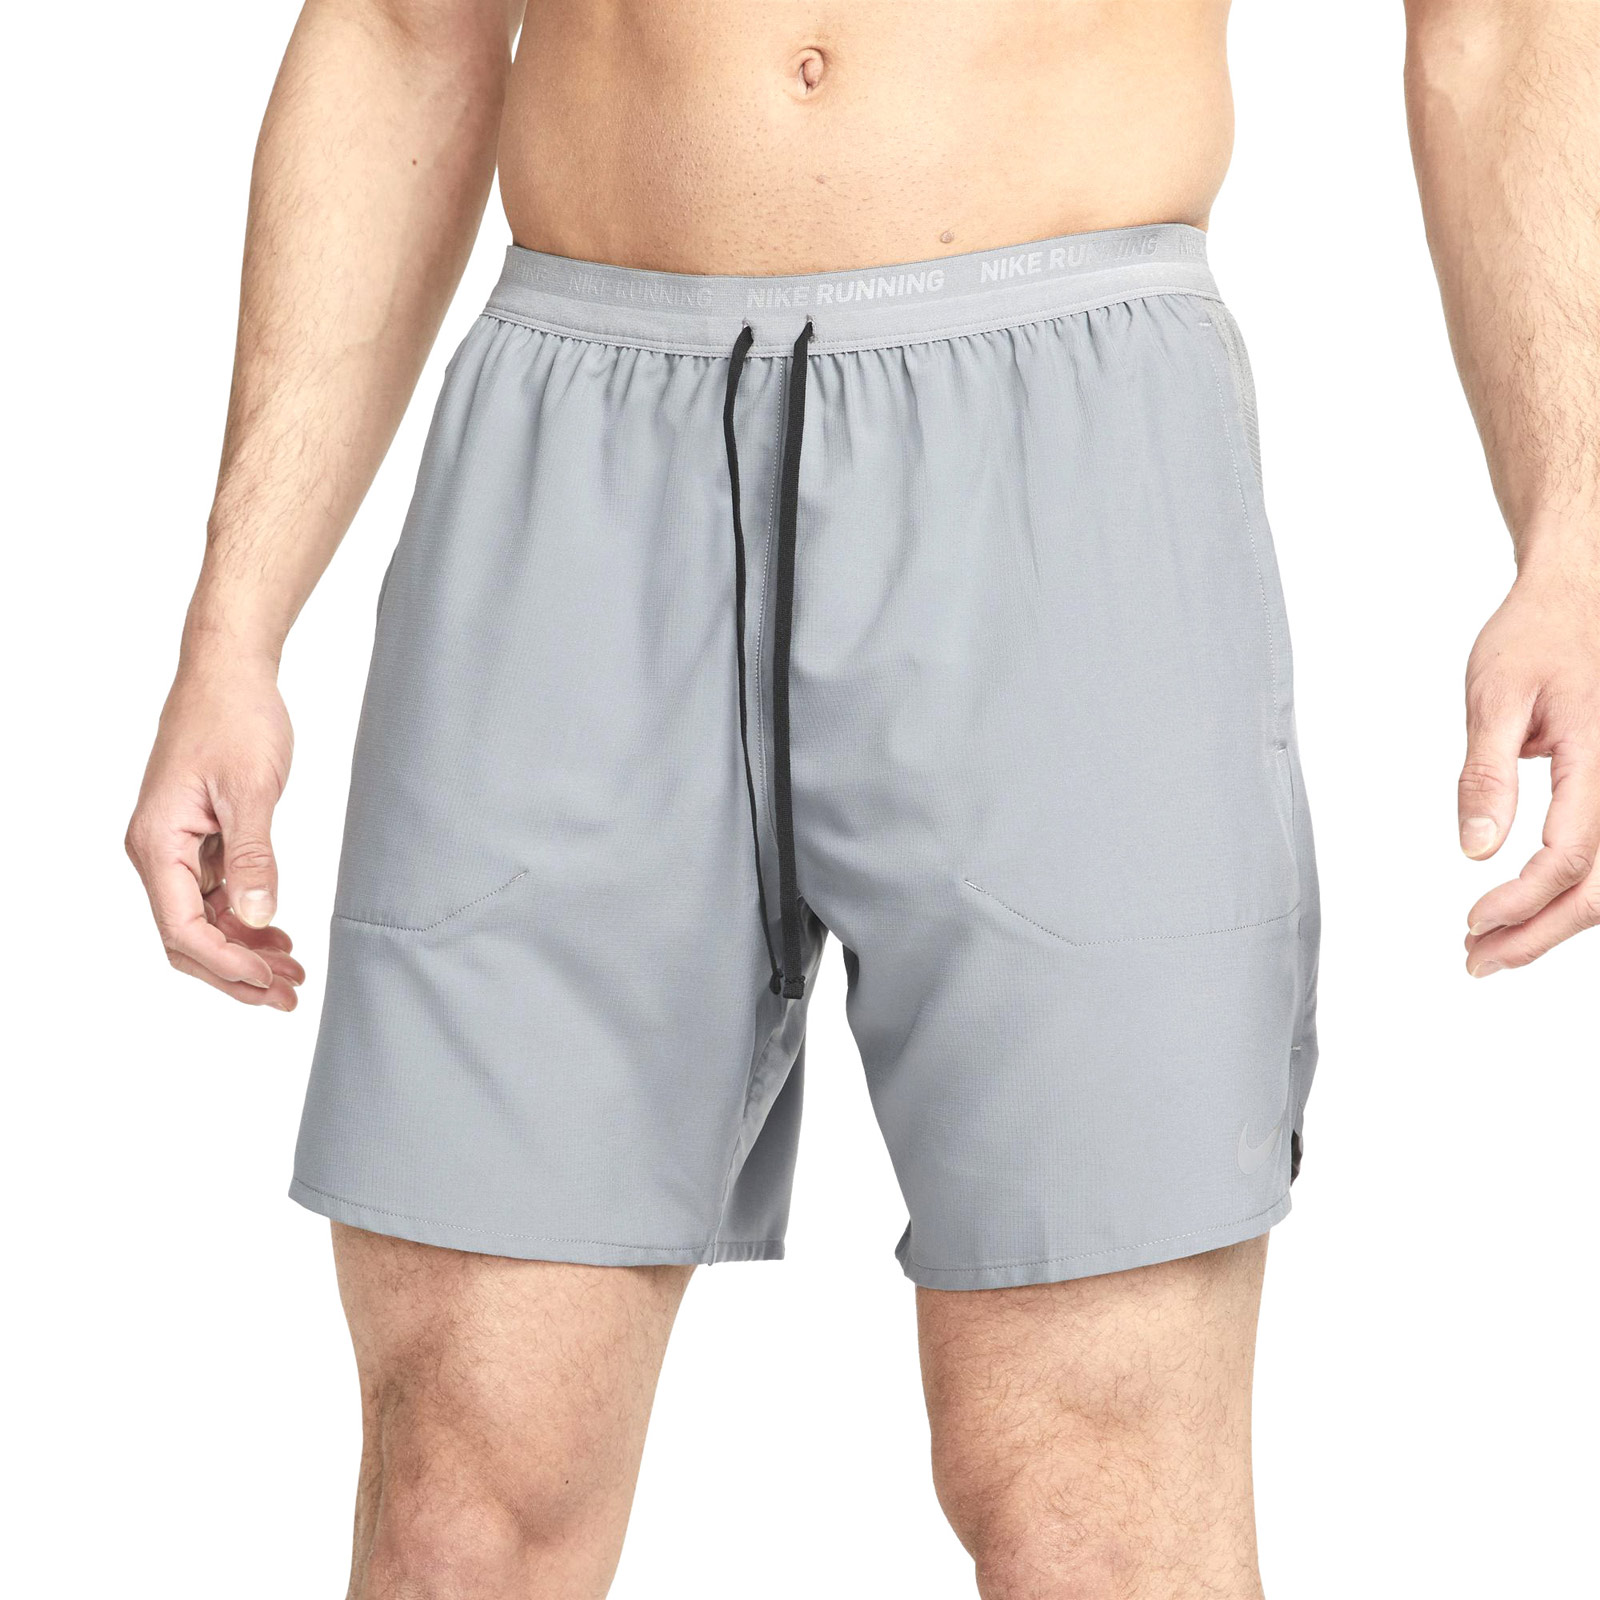 NIKE DRI-FIT STRIDE MENS 7" BRIEF-LINED RUNNING SHORTS